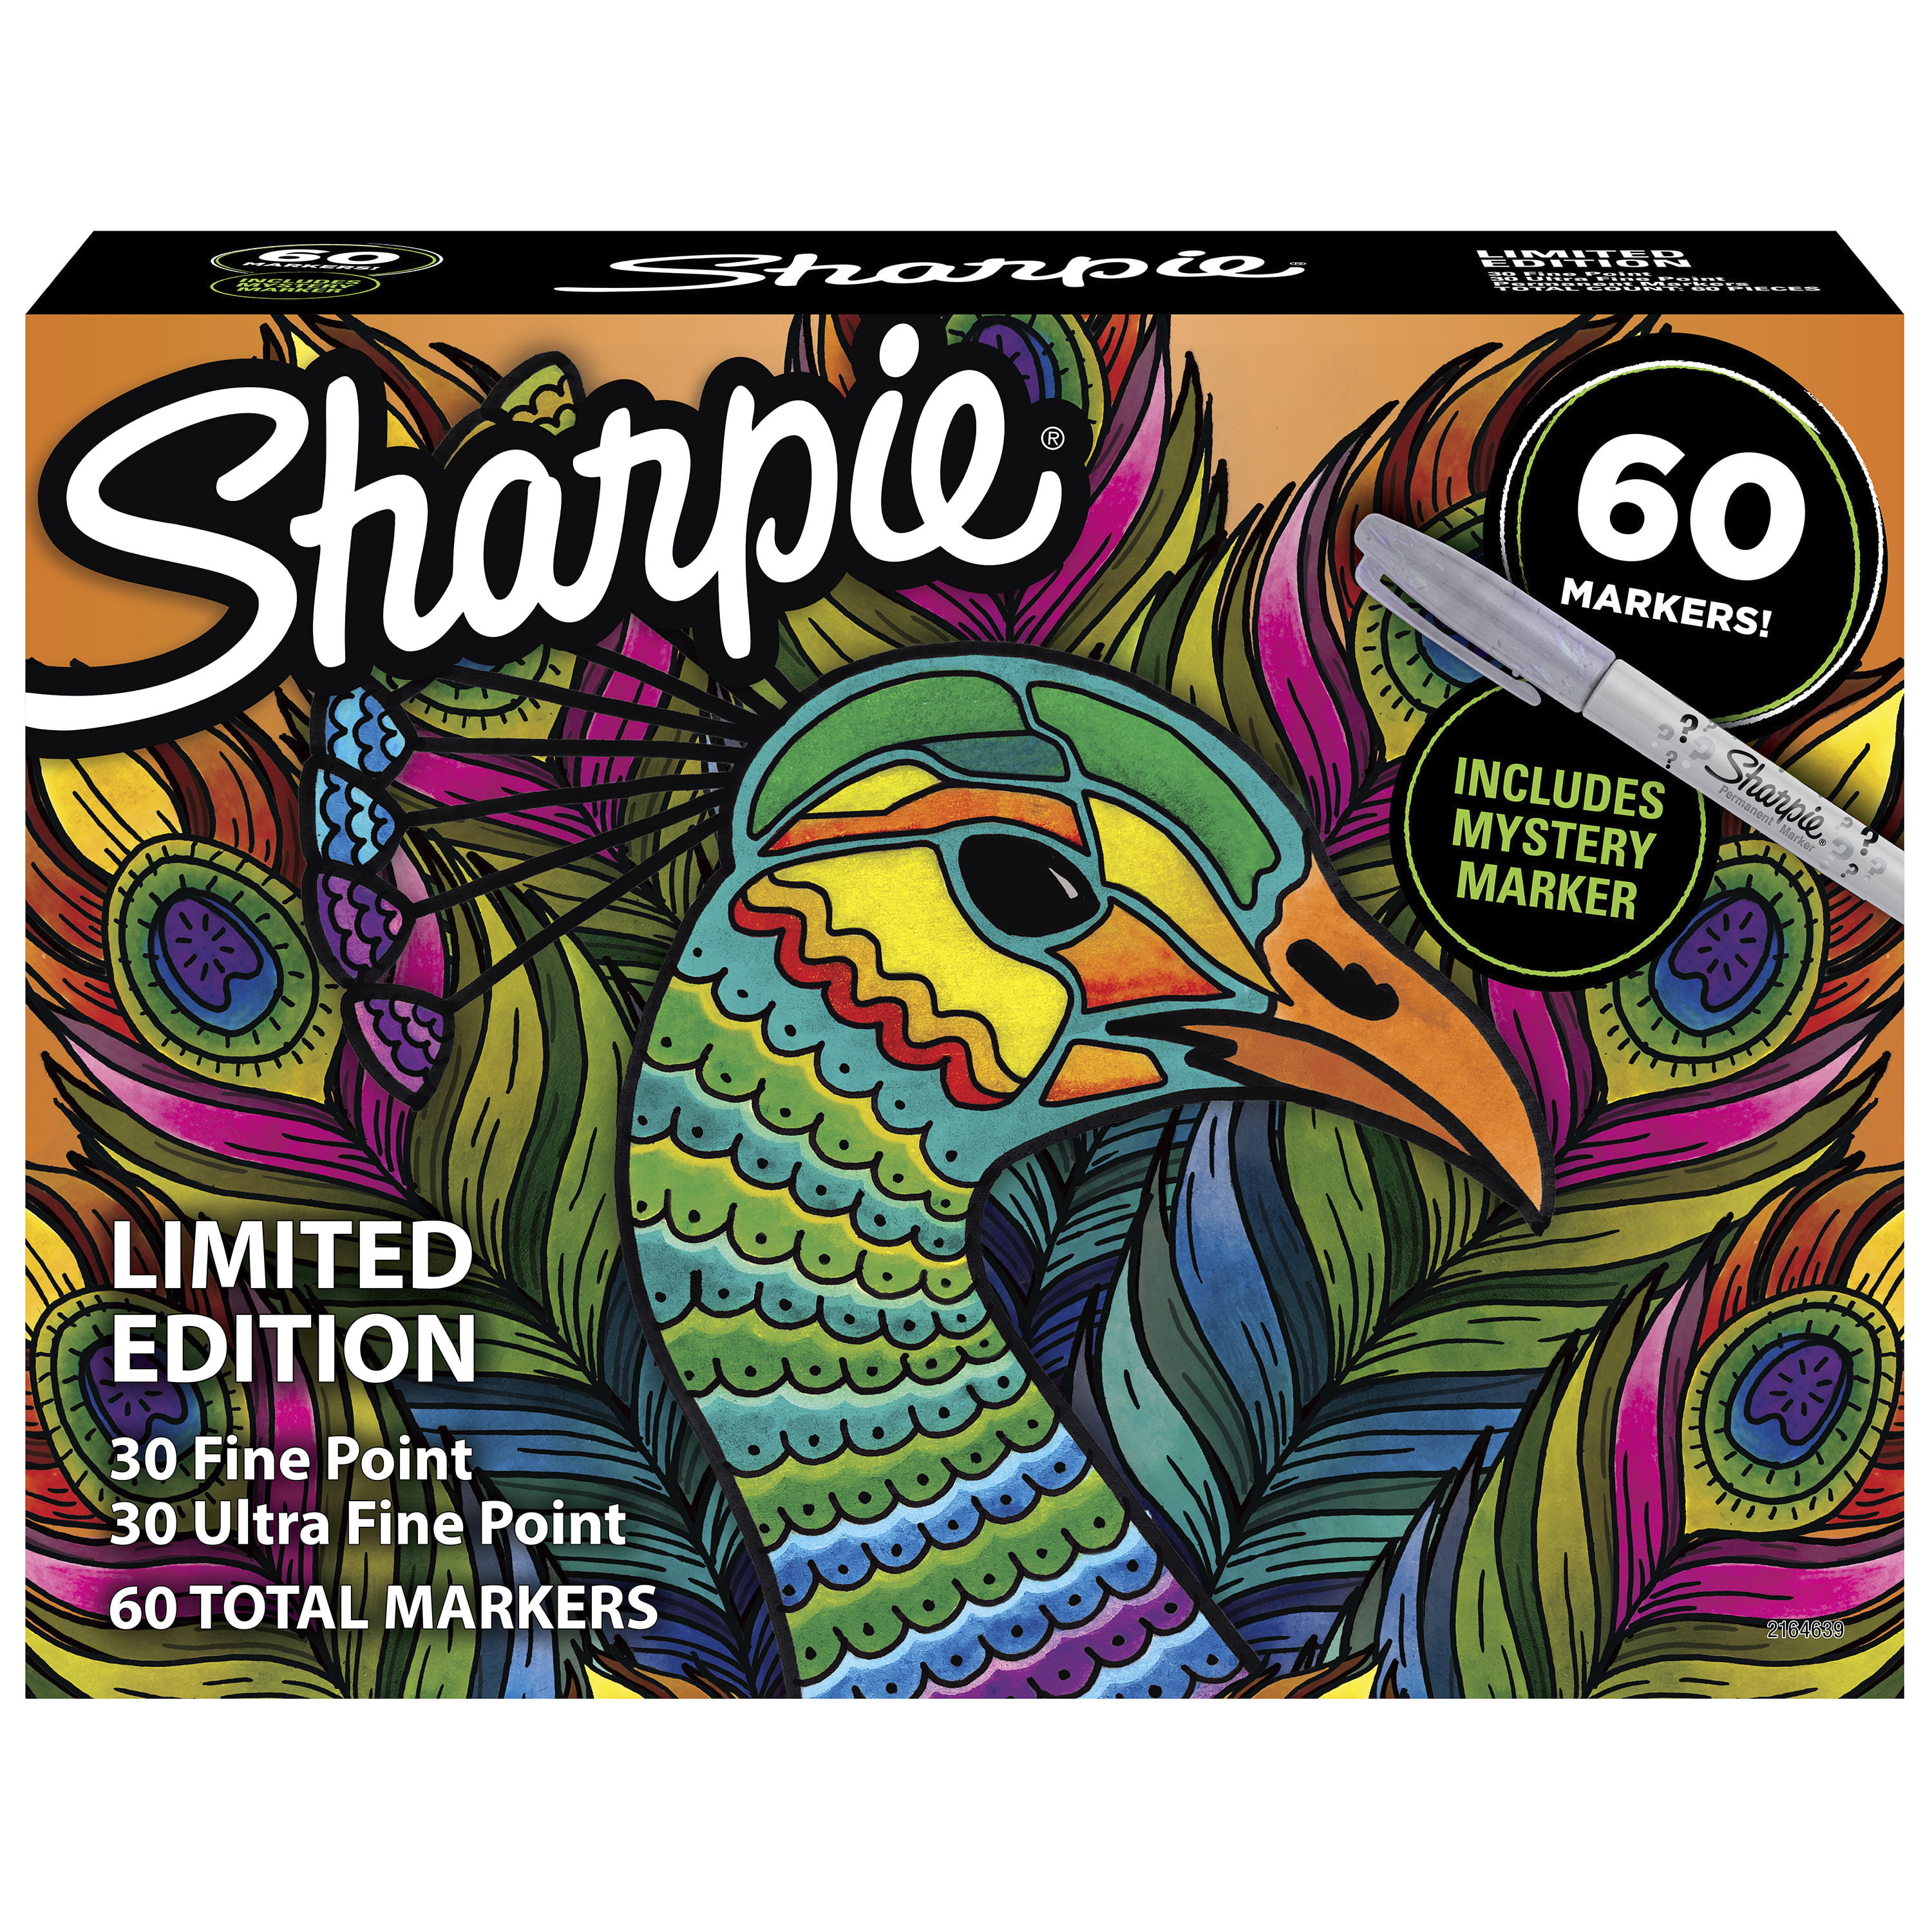 Sharpie Markers, 60 Count Set $24.07 Free ship with Walmart+ or $35 order